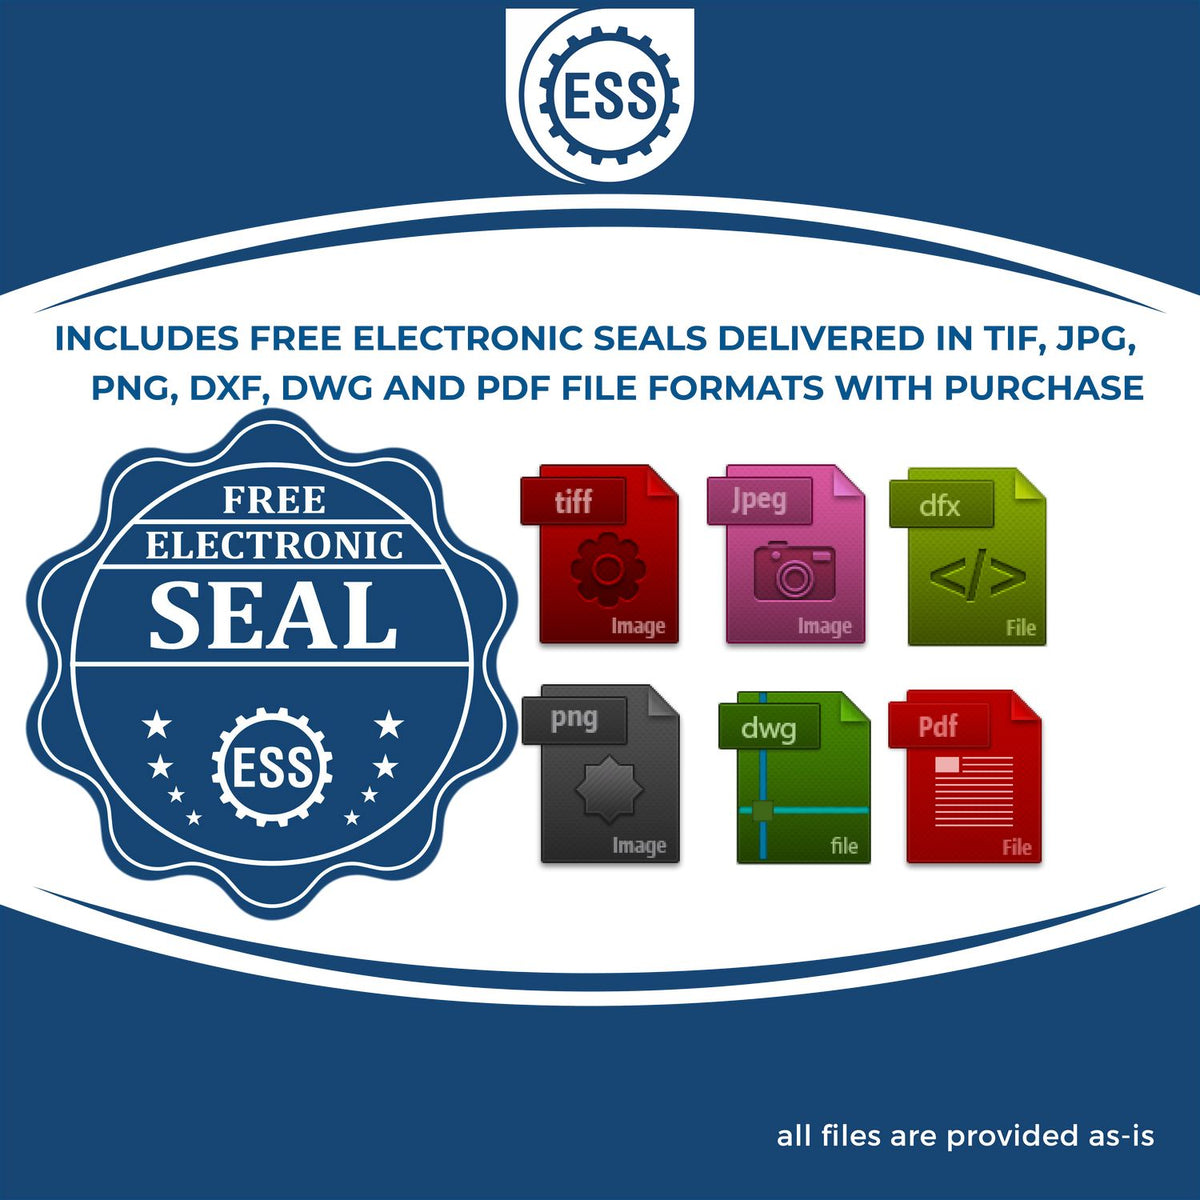 An infographic for the free electronic seal for the State of Kansas Extended Long Reach Geologist Seal illustrating the different file type icons such as DXF, DWG, TIF, JPG and PNG.